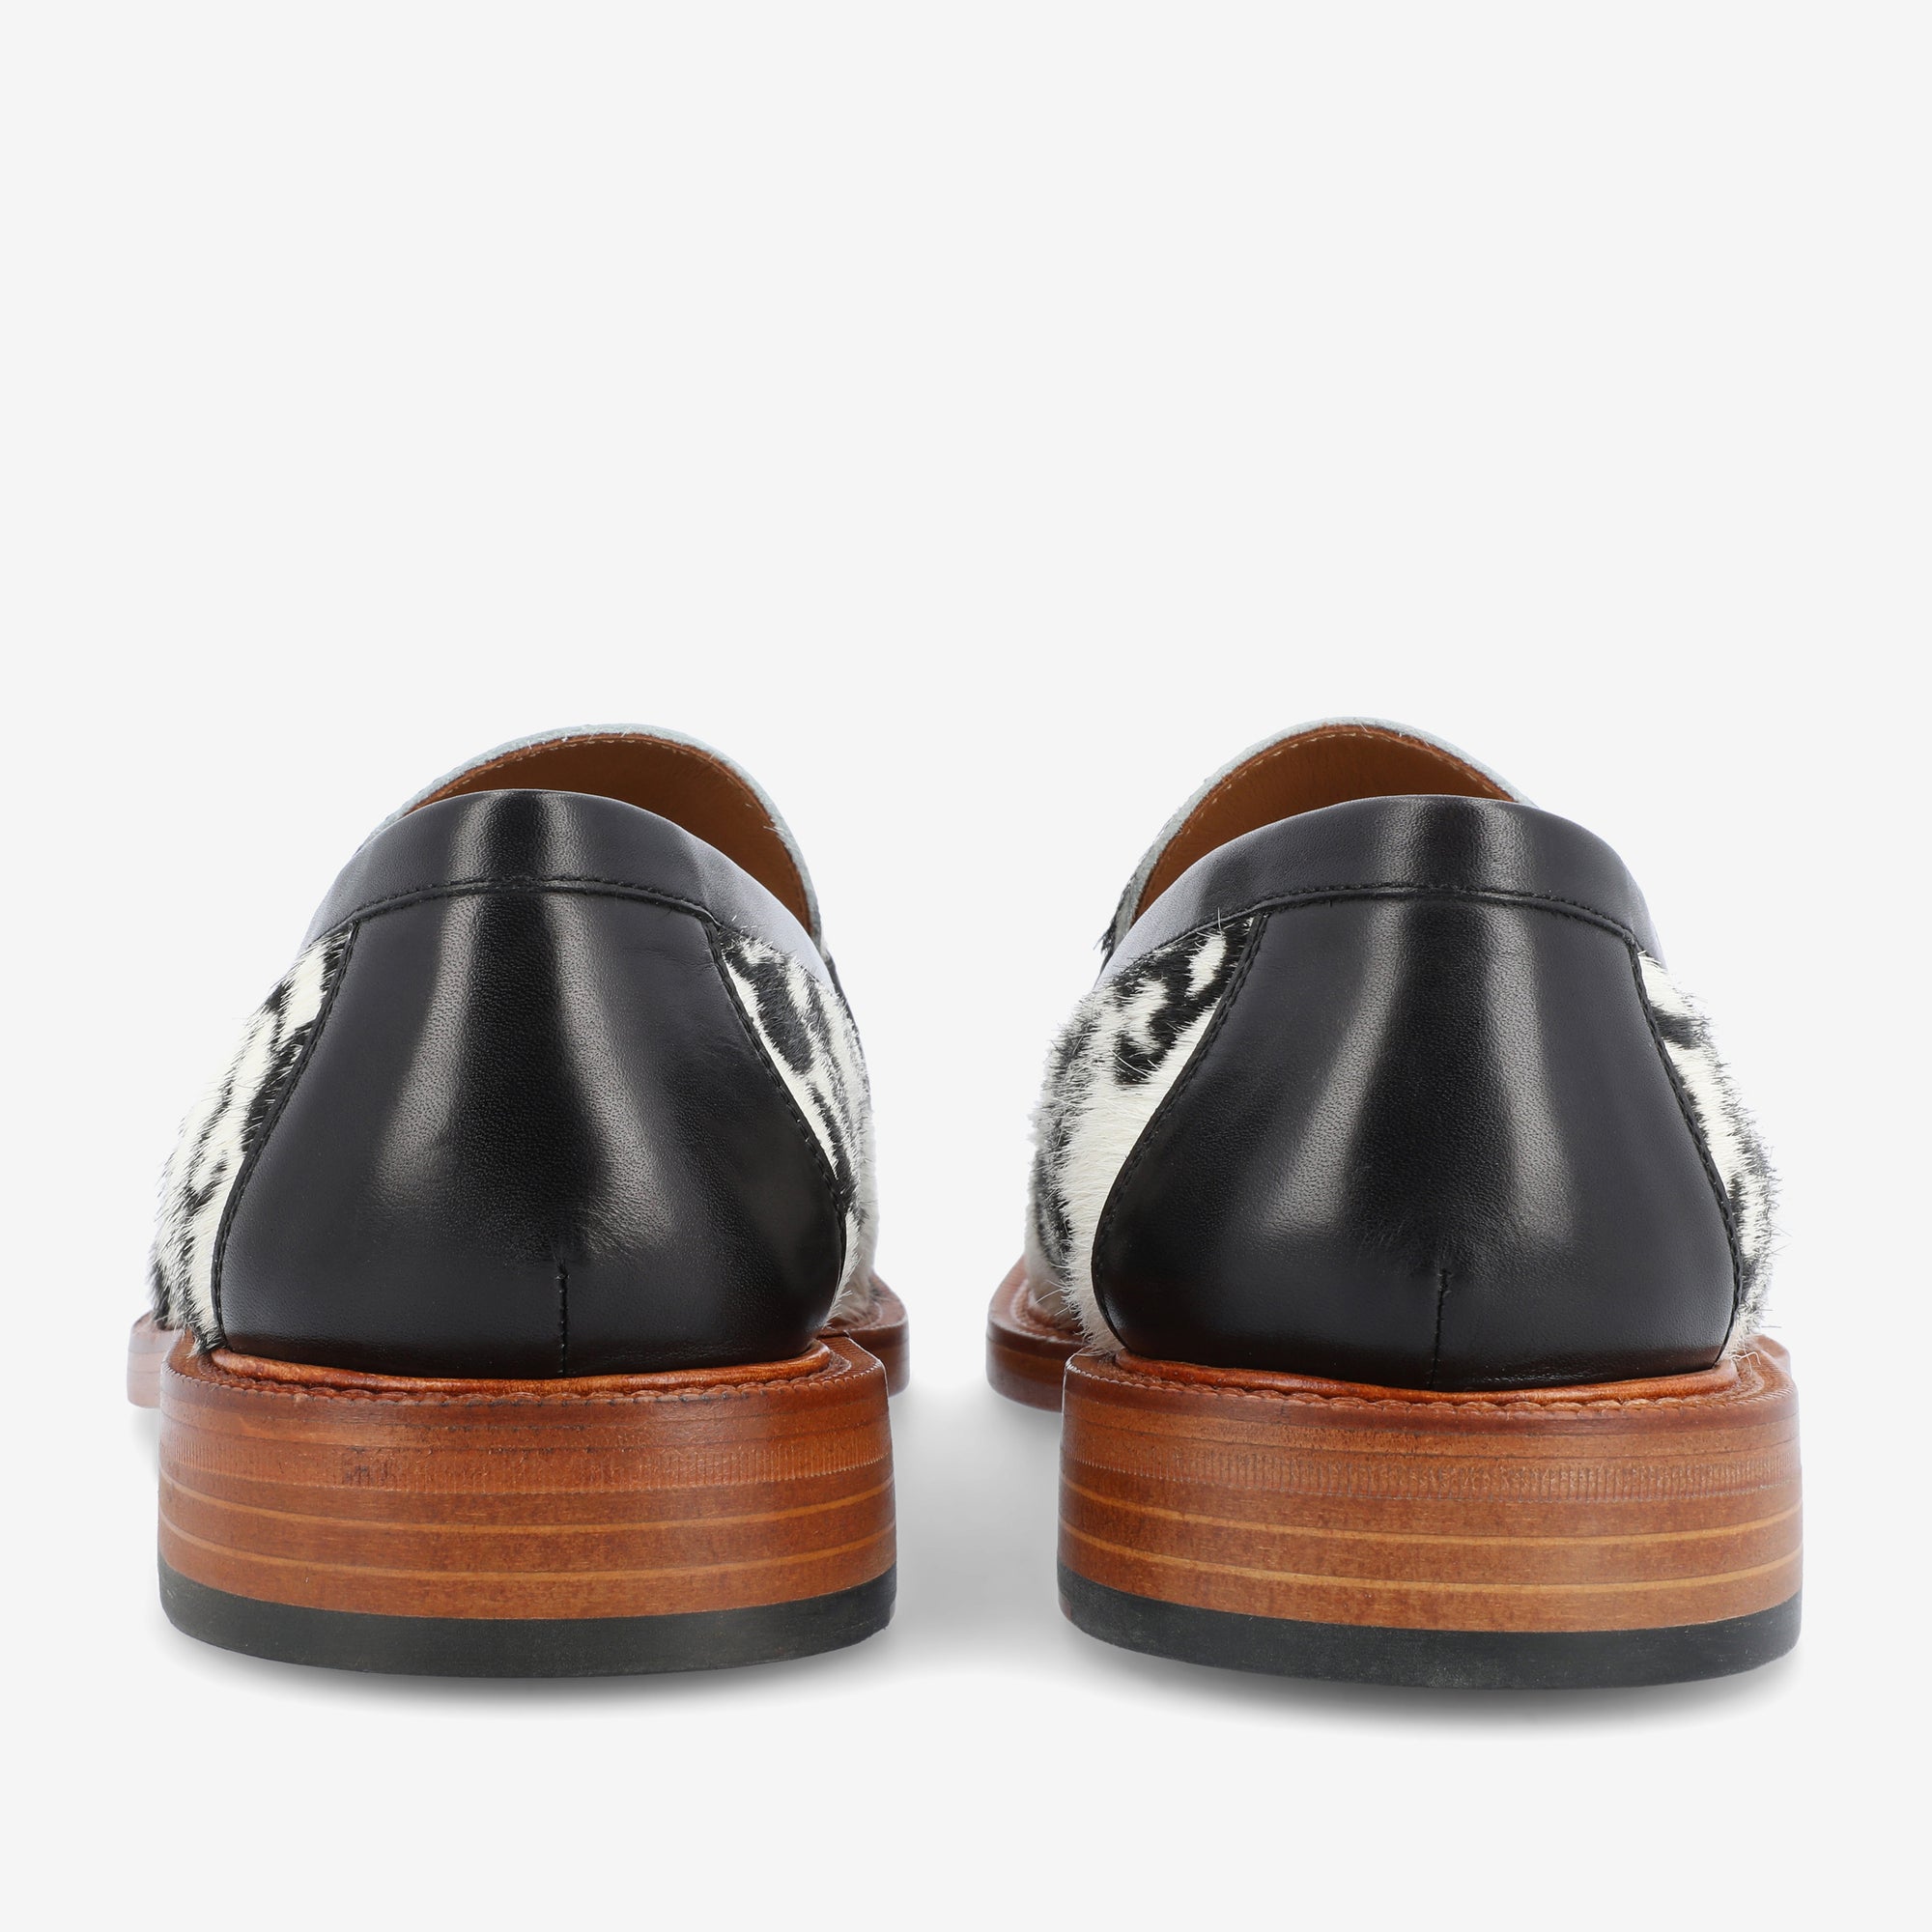 The Fitz Loafer in Wallflowers